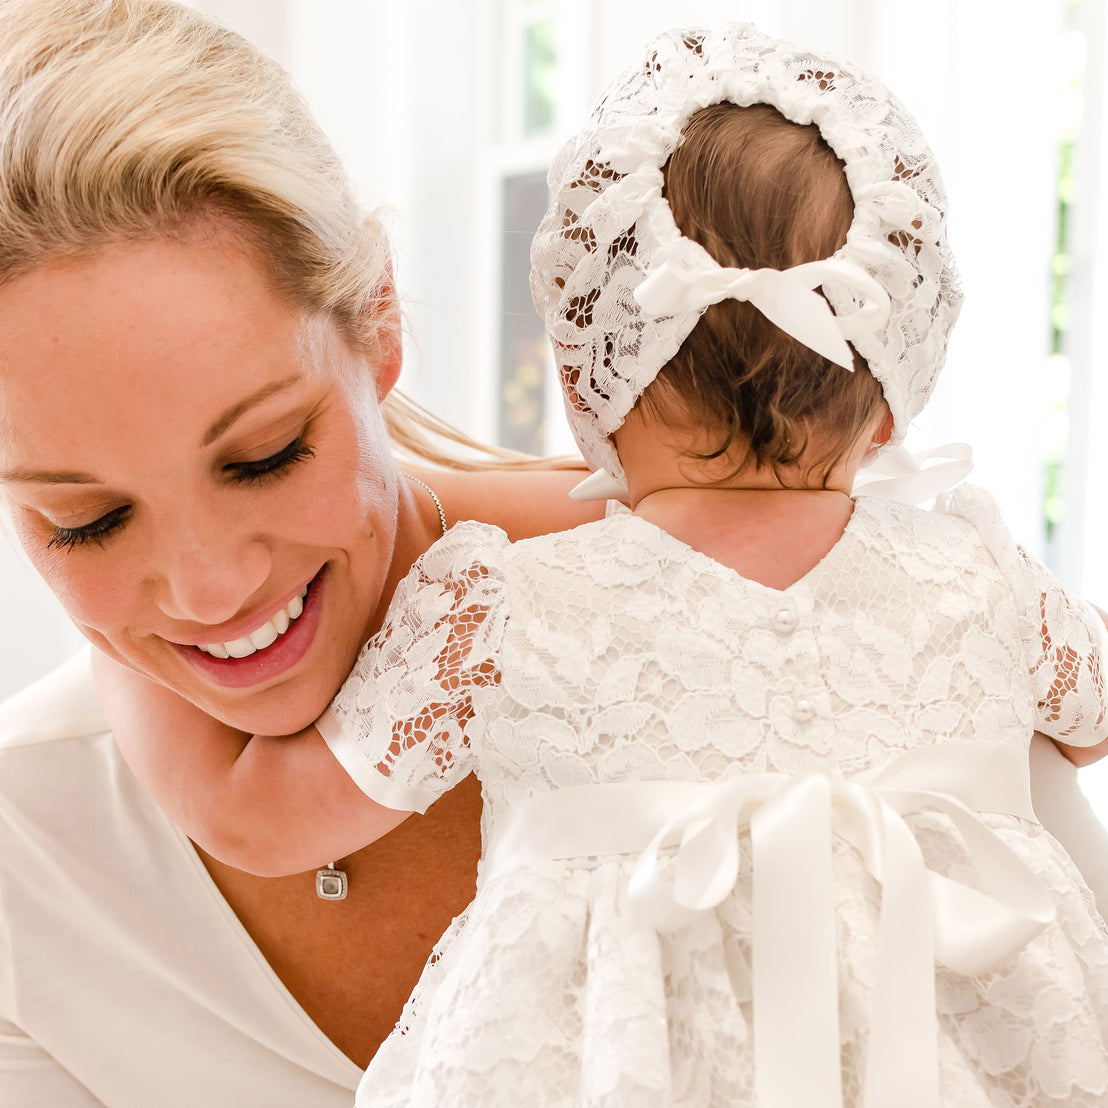 A smiling woman holding a baby dressed in a white lace outfit with a Rose Lace Bonnet, in a brightly lit room. The focus is on the back of the baby's outfit and the woman's